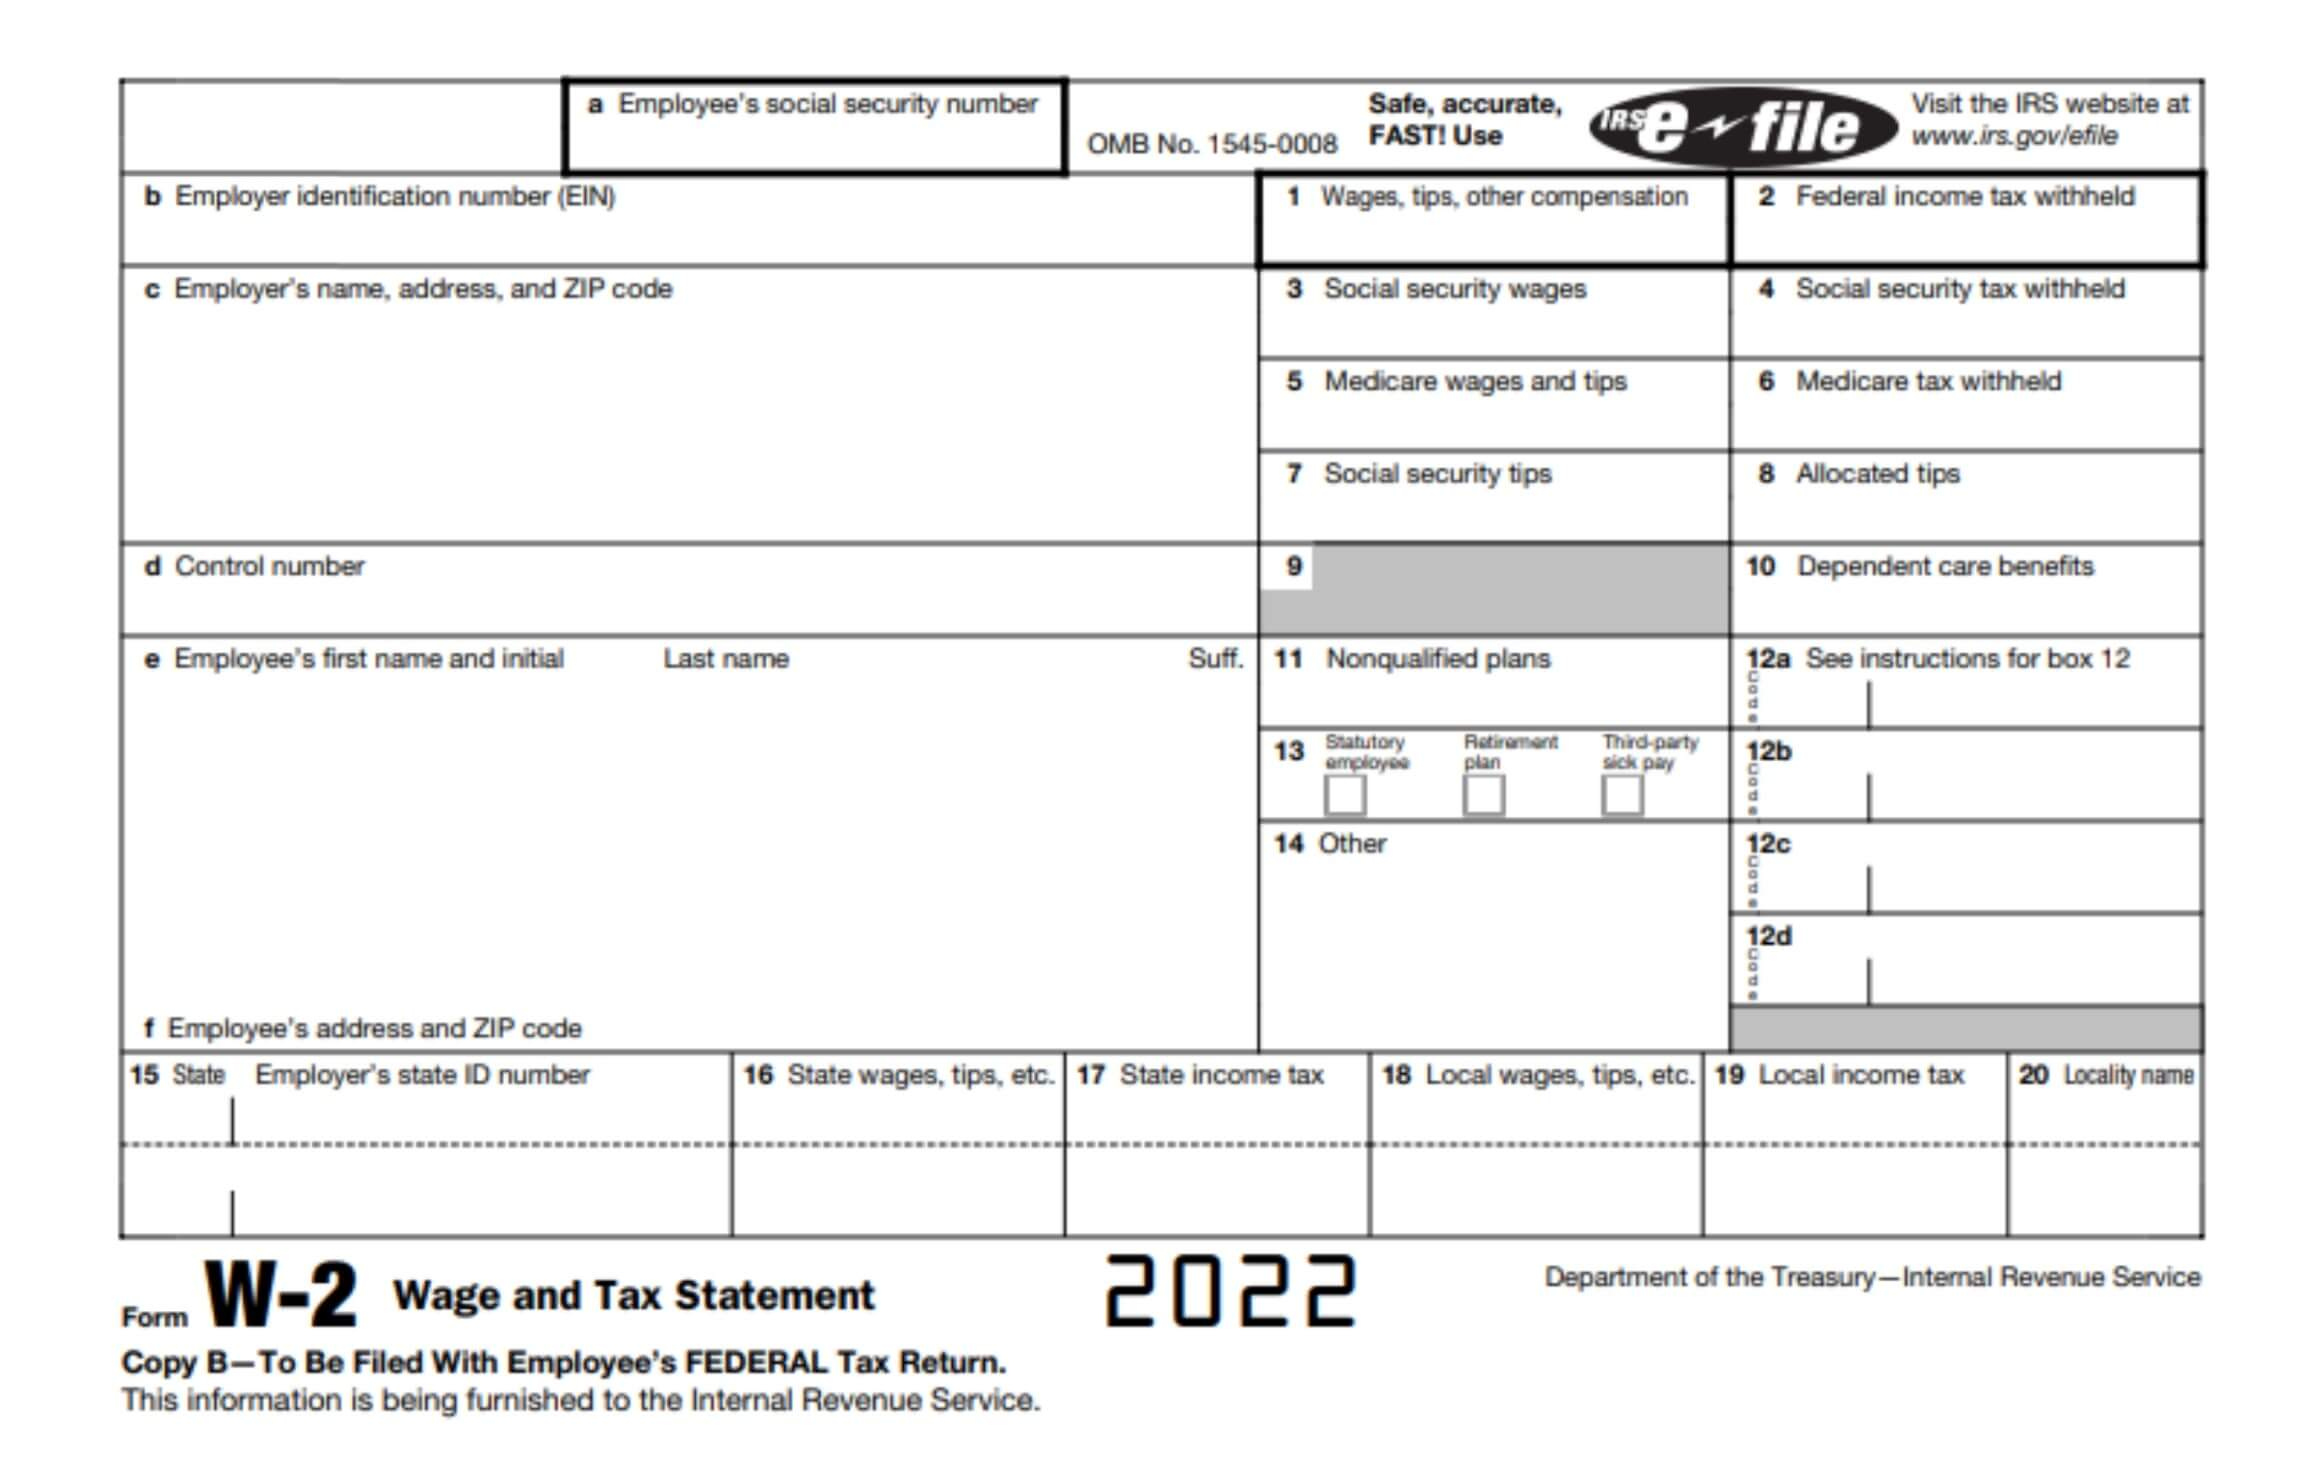 Understanding Your Irs Form W-2 with regard to What Is Line 12A On A W2 Form